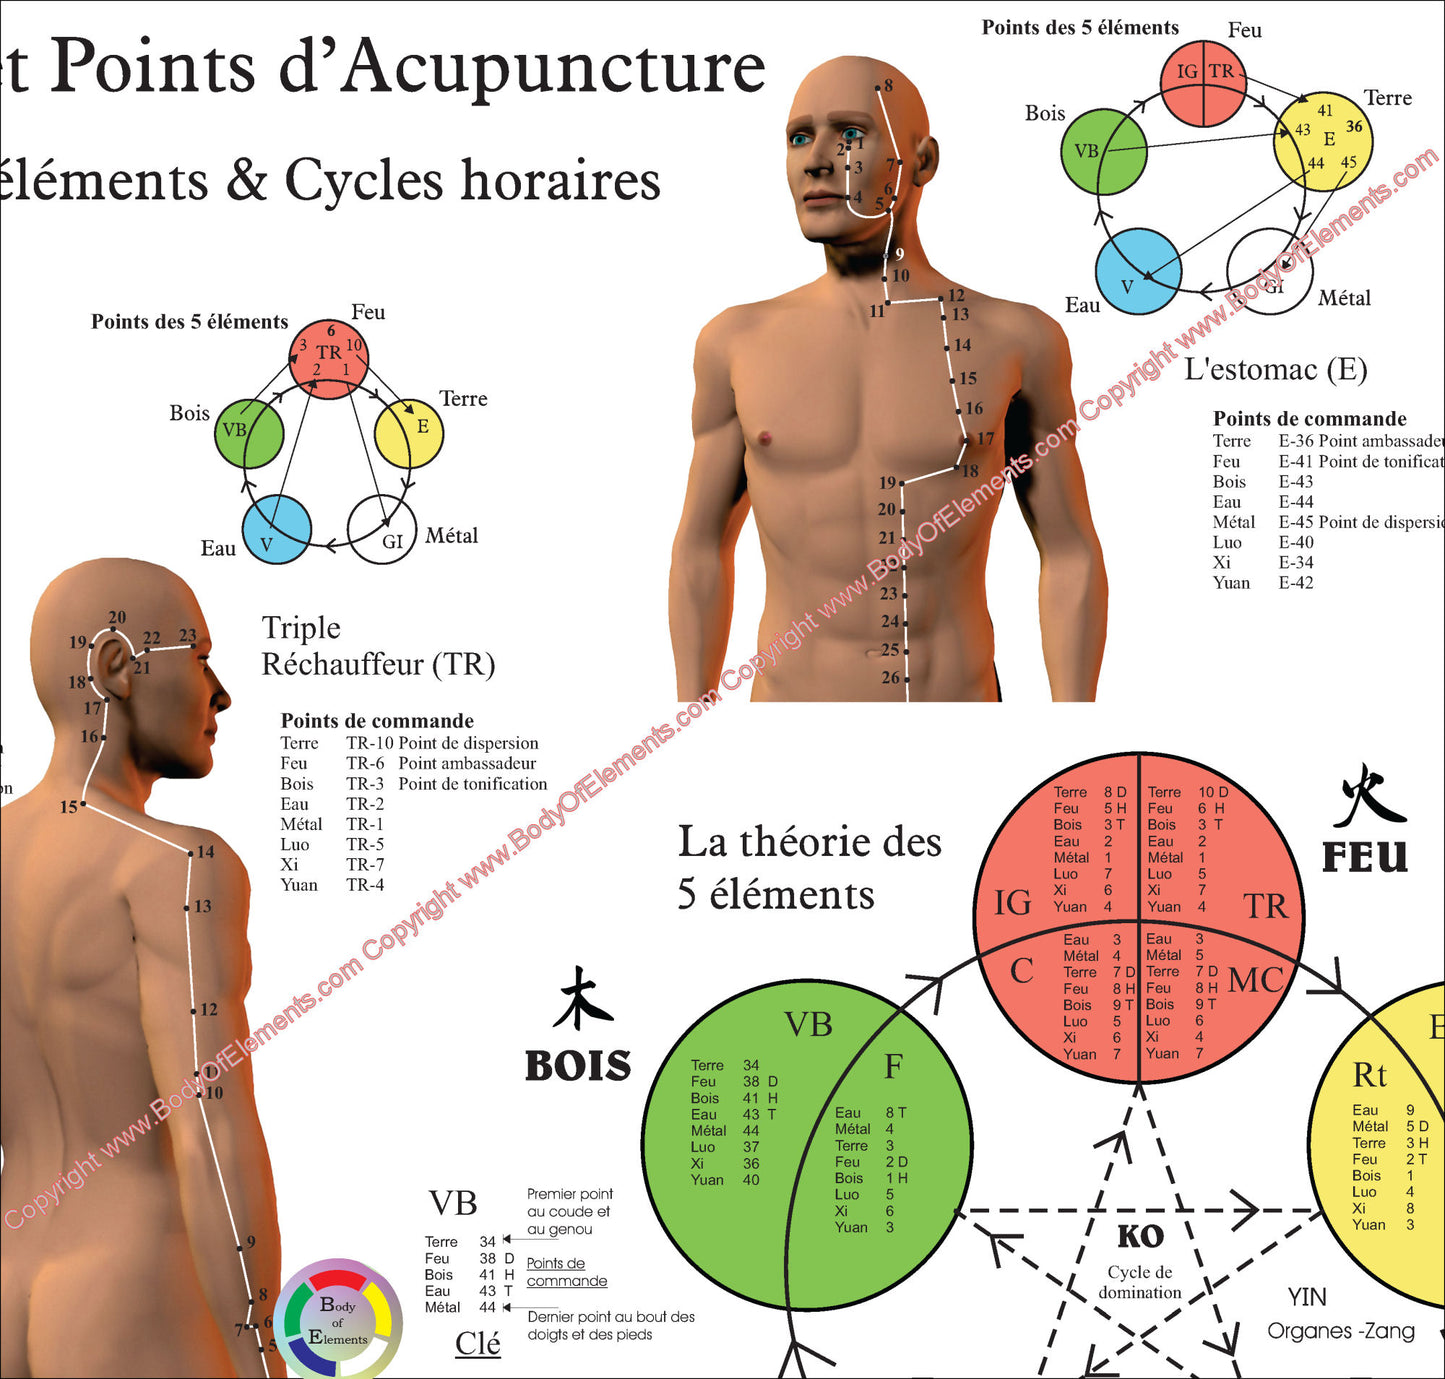 French acupuncture meridian point locations poster.